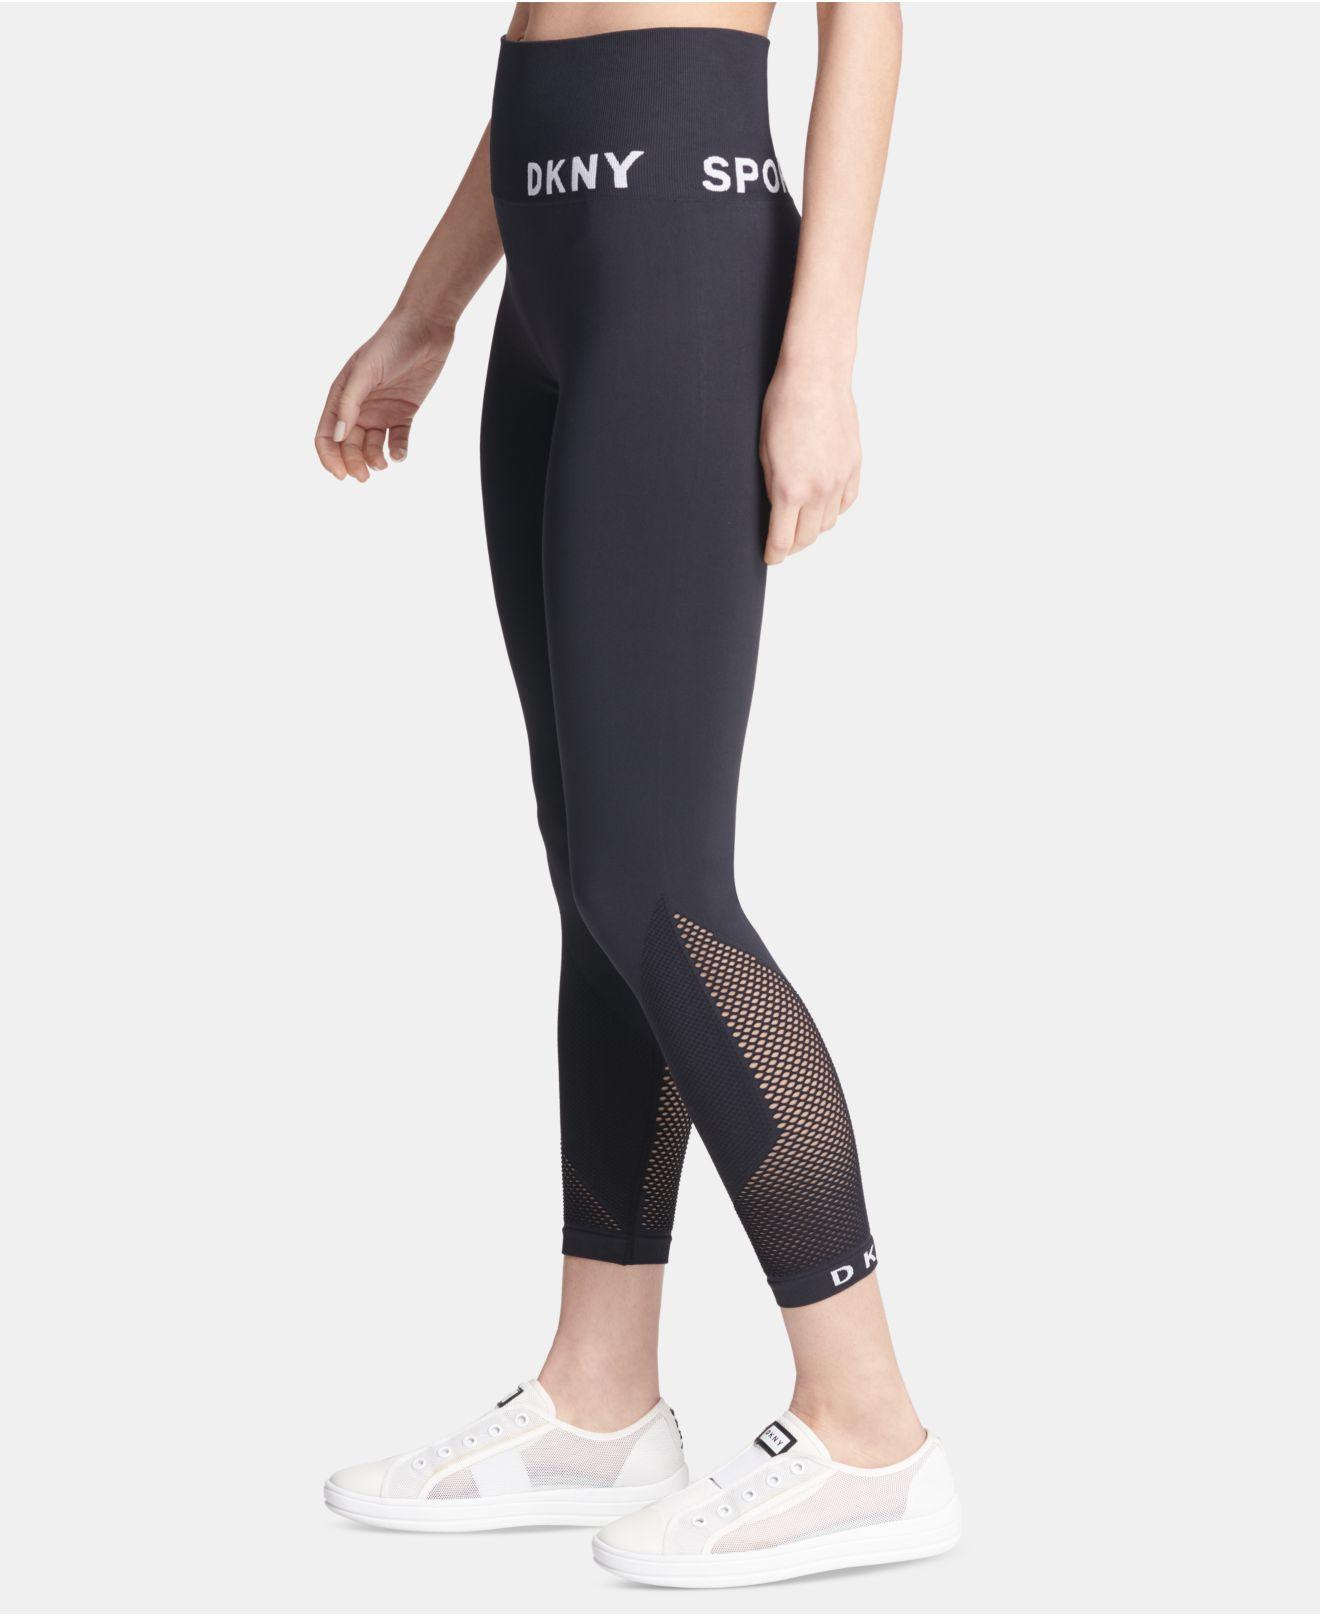 DKNY Synthetic Sport High-waist Seamless Ankle Leggings in Black - Lyst